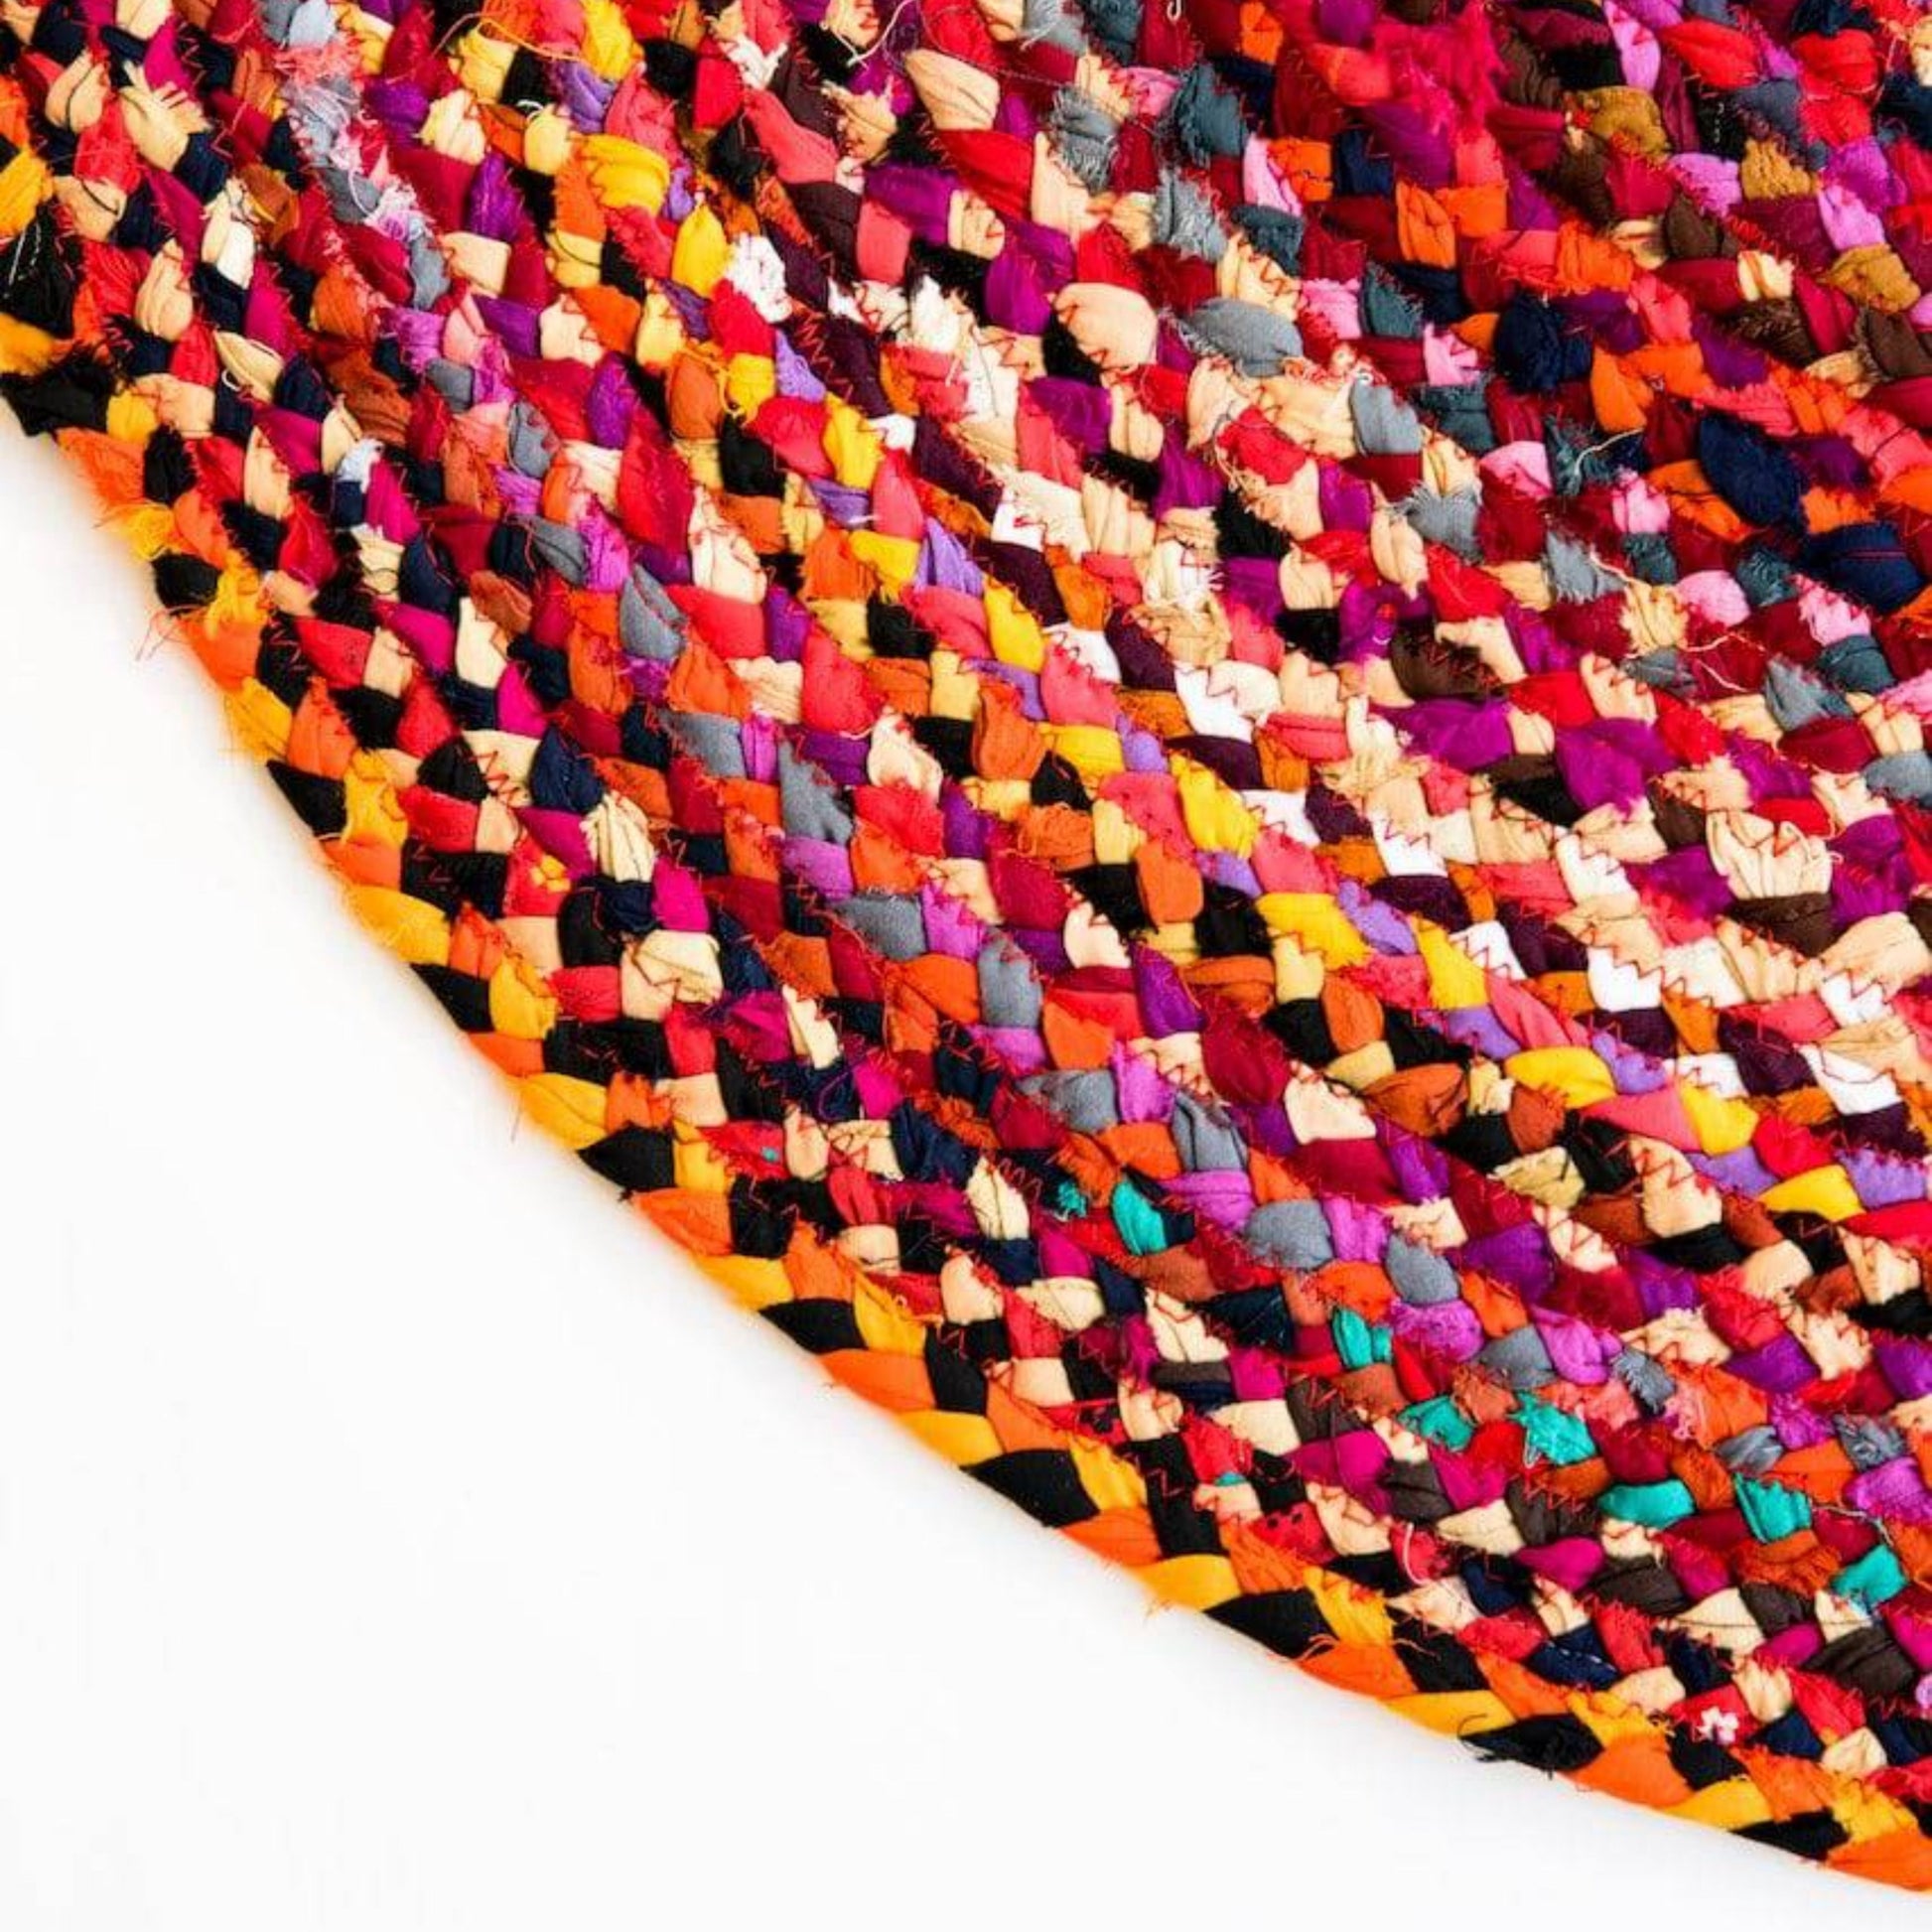 Recycled Cotton Round Chindi Rag Rug - Multicolour 3 ft, Braided Style, Hand-Knotted - Aksa Home Decor 